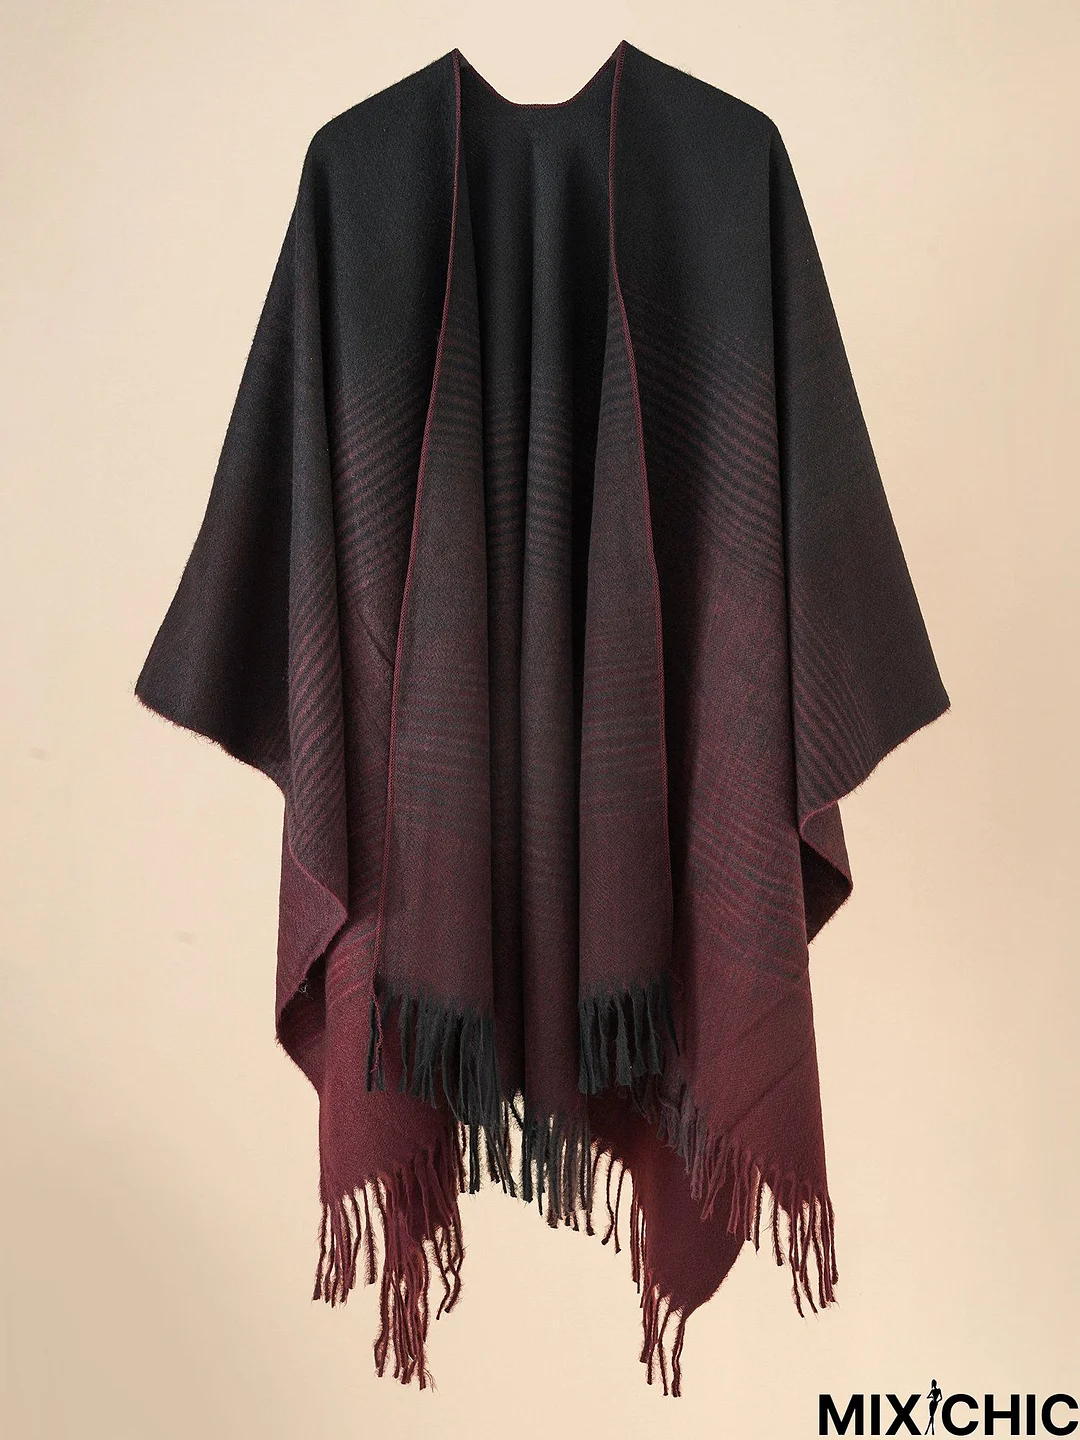 Home Outdoor Casual Gradient Color Striped Pattern Shawl Scarf Autumn Winter Warm Accessories